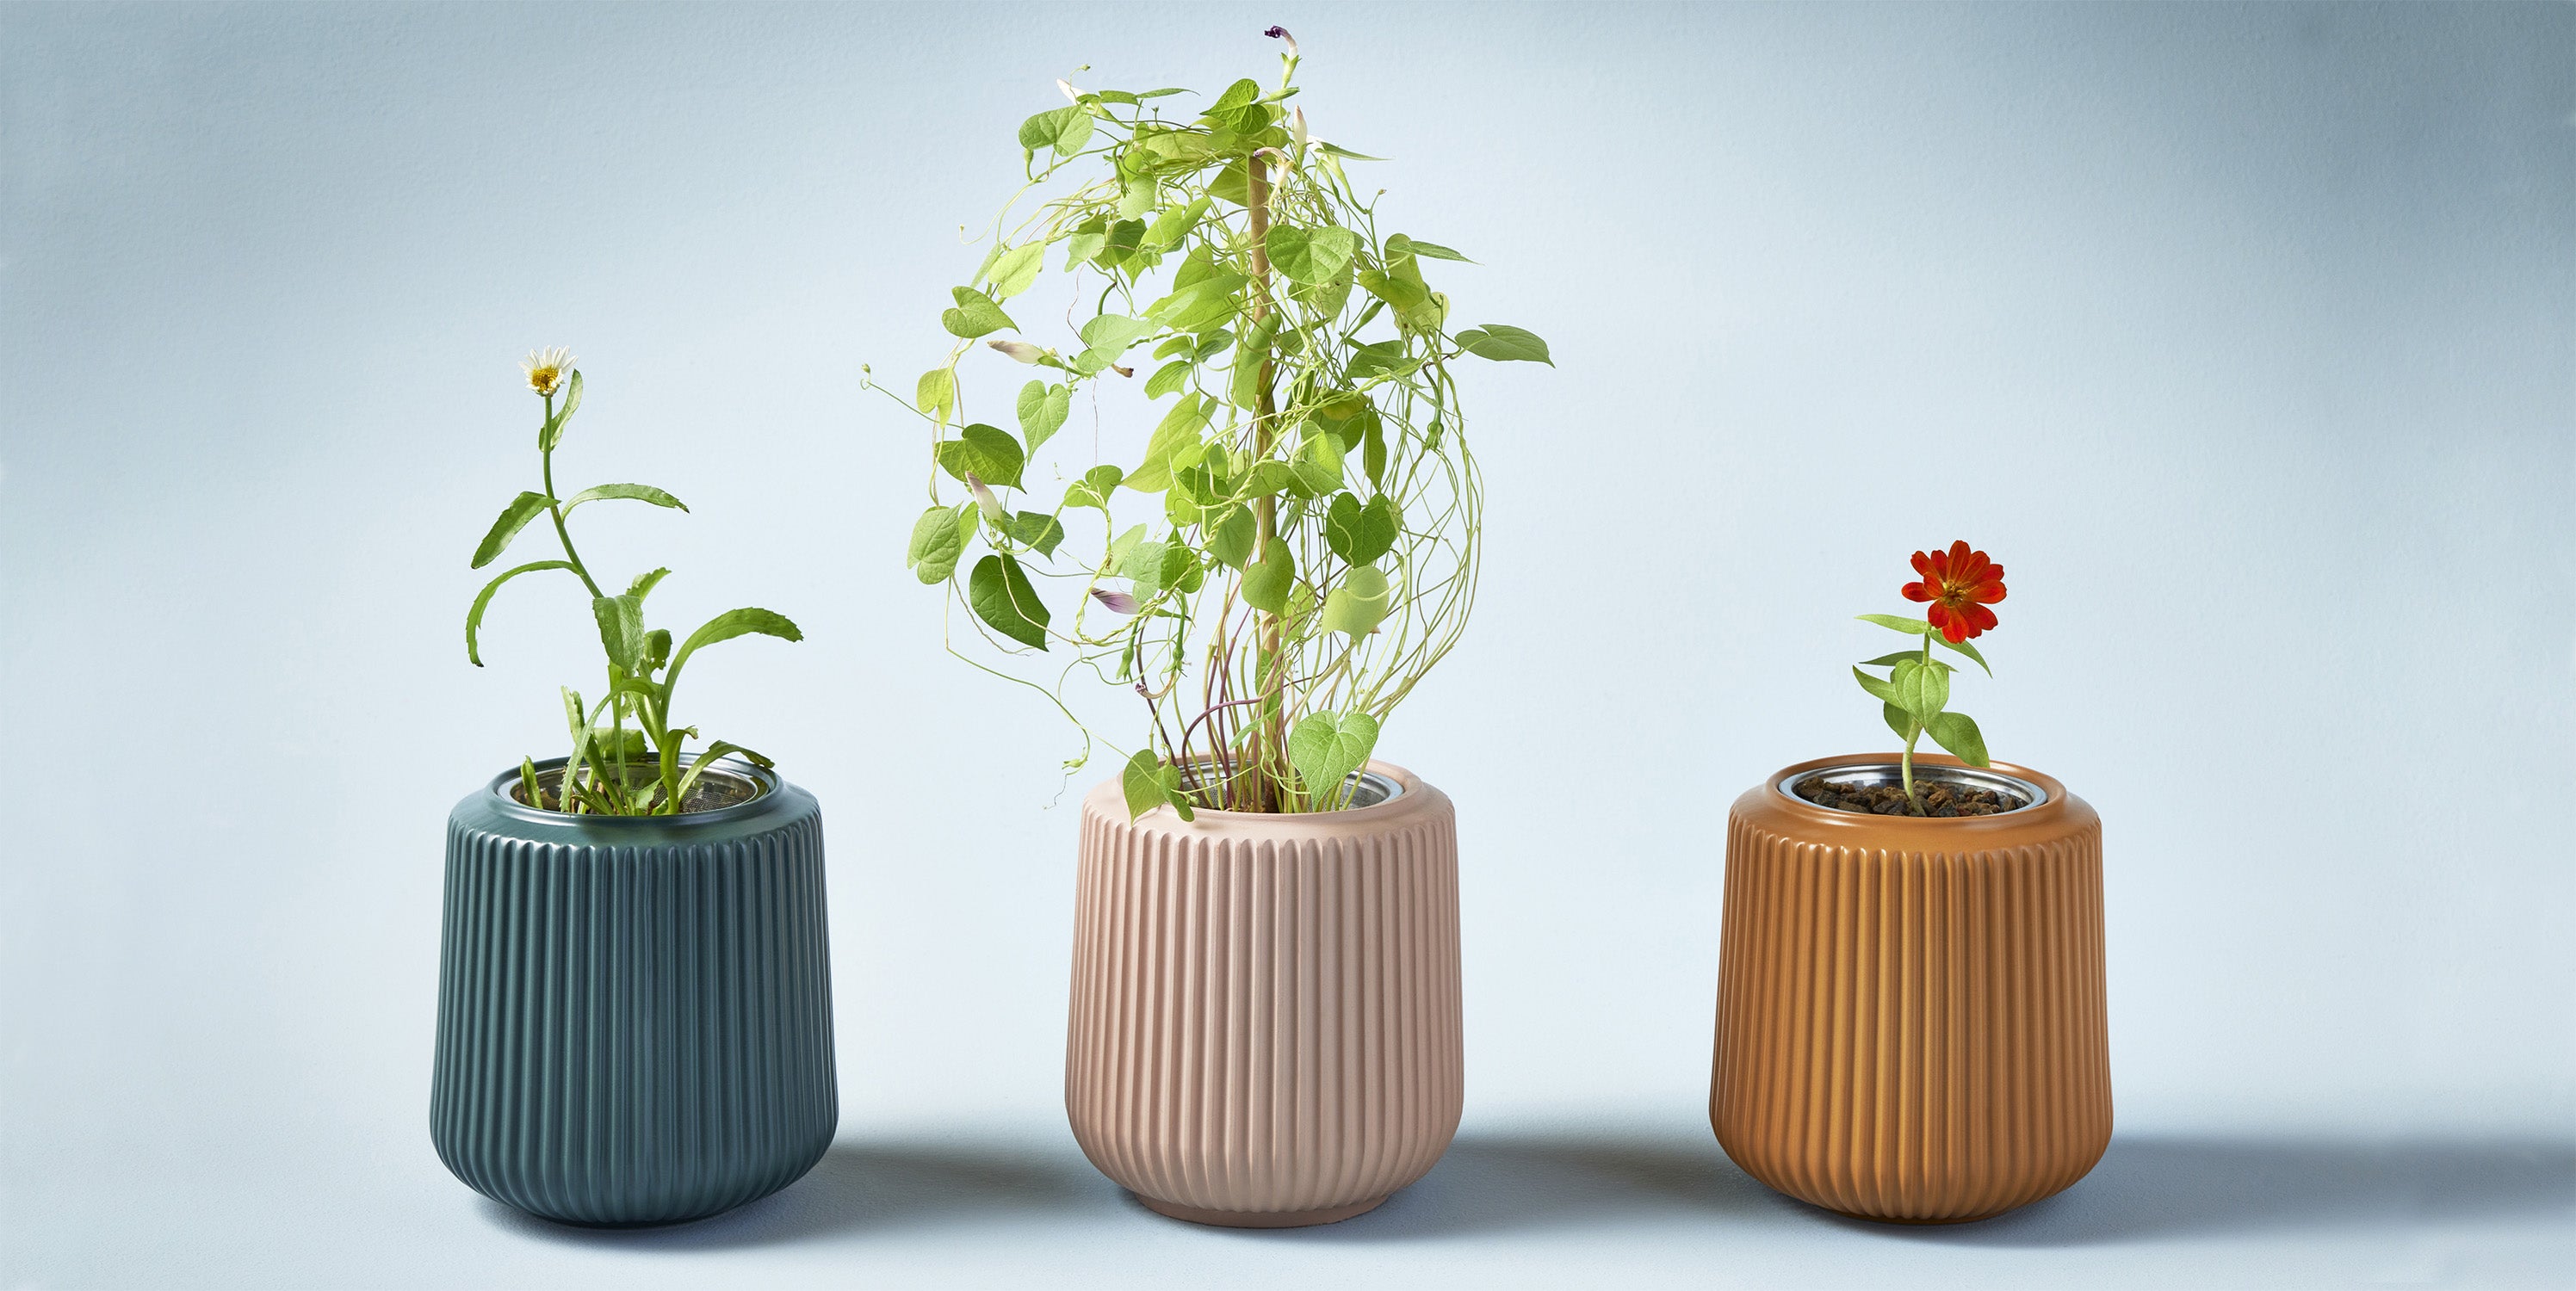 Three planters in a row with small green plants growing from each one